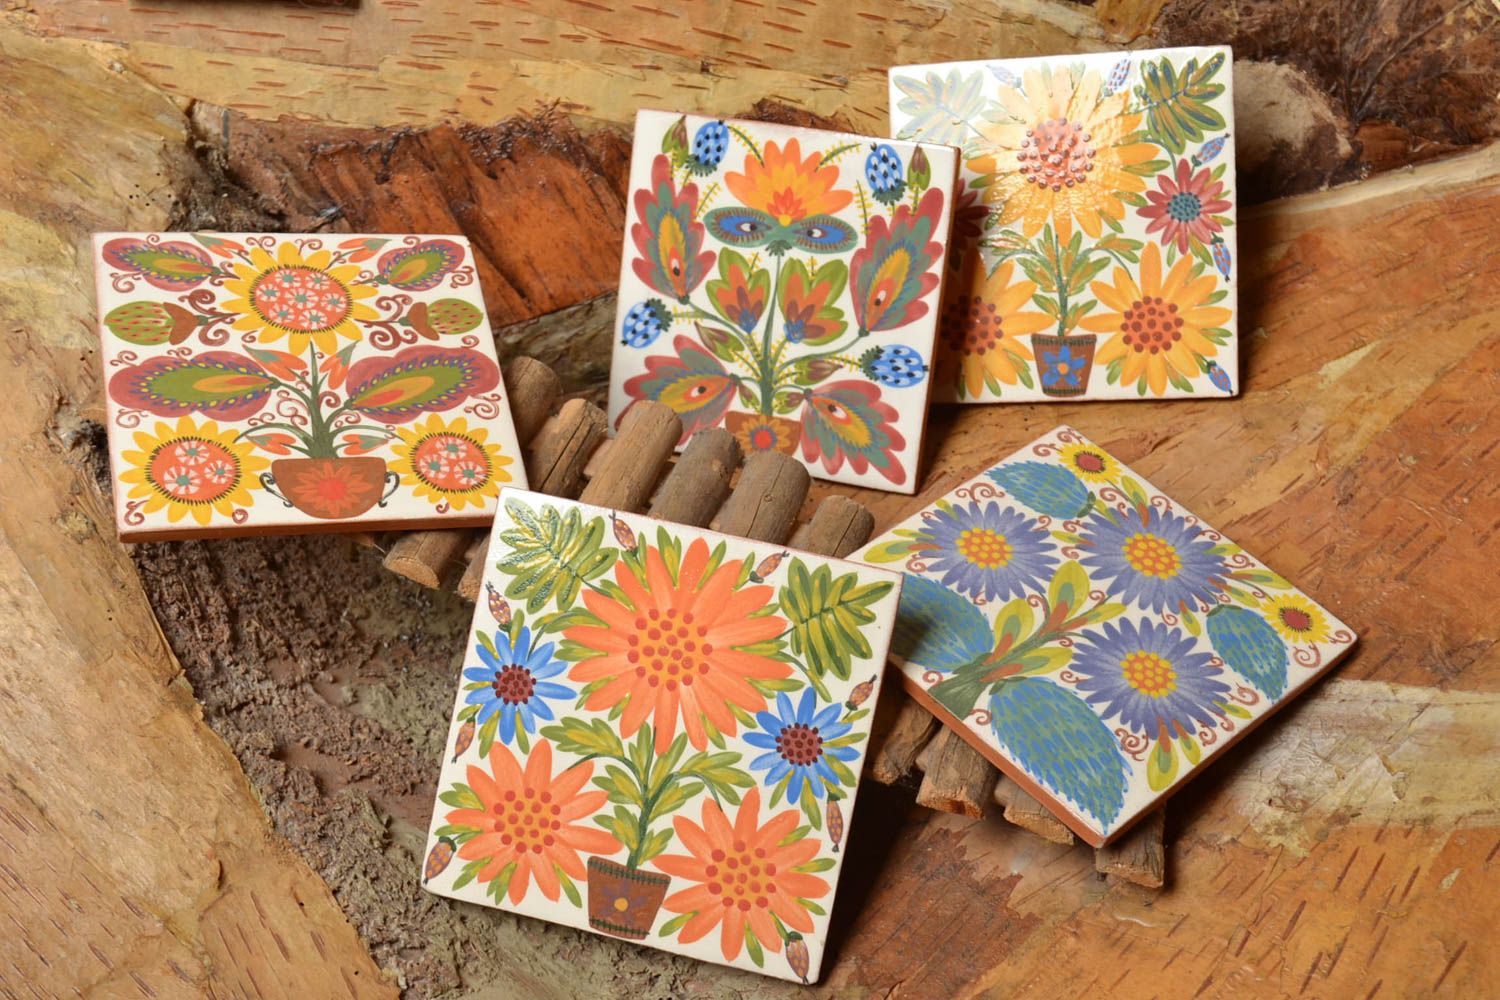 Tiles for fireplace and wall decor set of 5 small square handmade panels photo 1